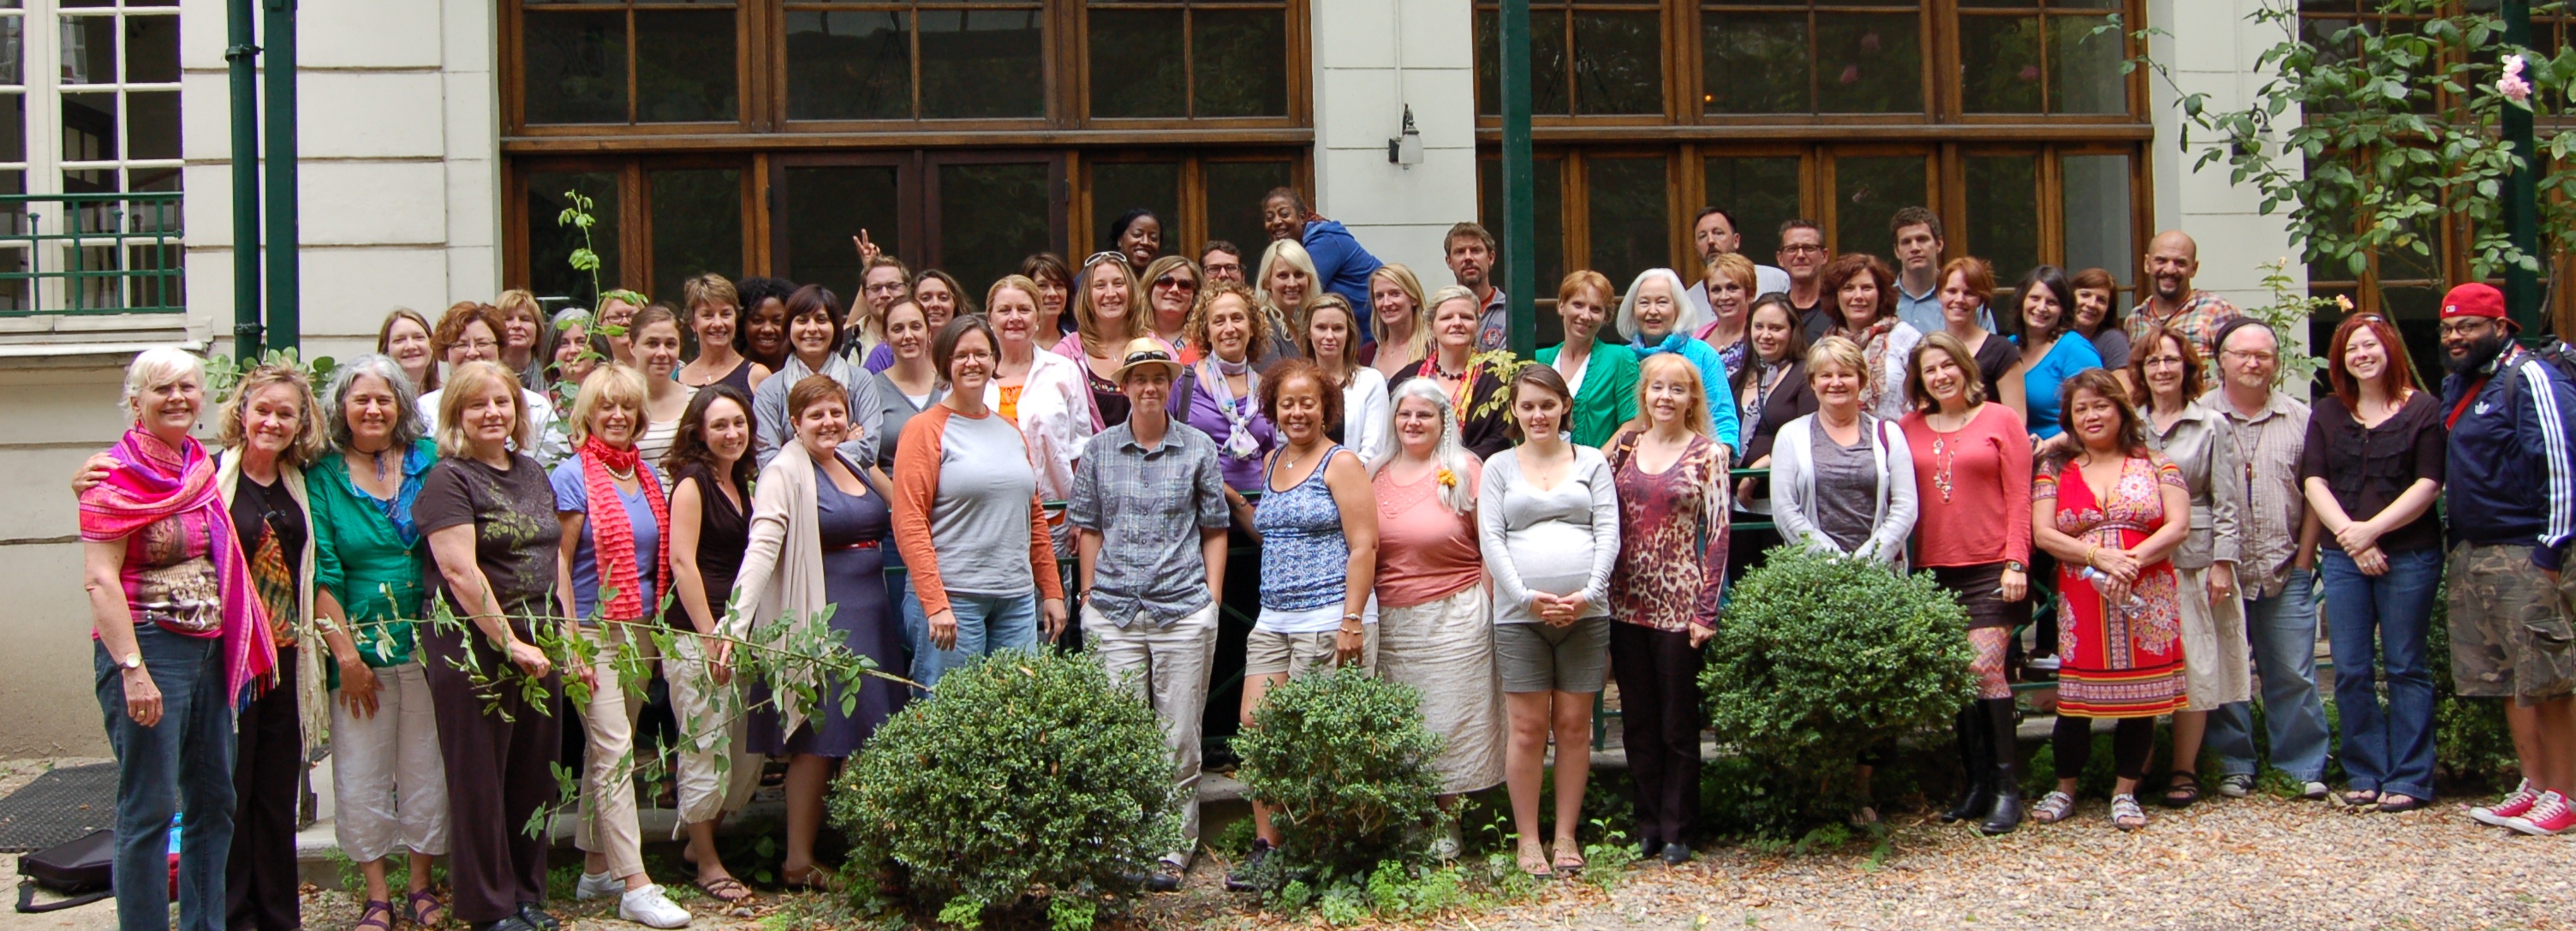 image of Spalding University MFA students, faculty, and staff in the courtyard of Reid Hall in Paris